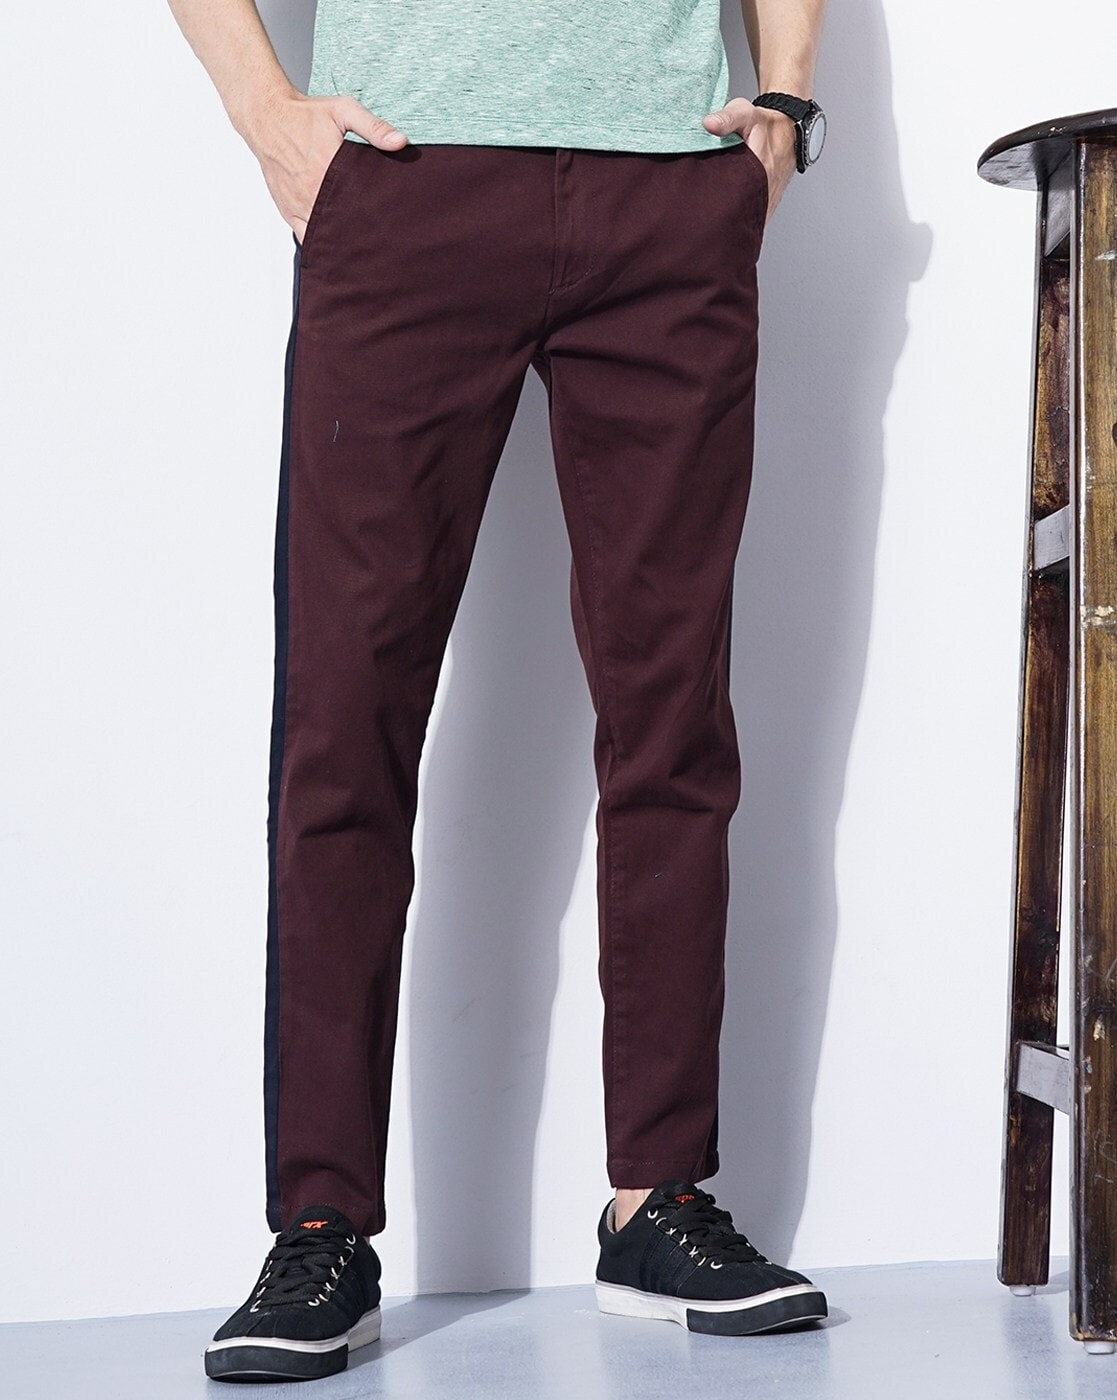 Buy Rose Trousers  Pants for Men by The Indian Garage Co Online  Ajiocom